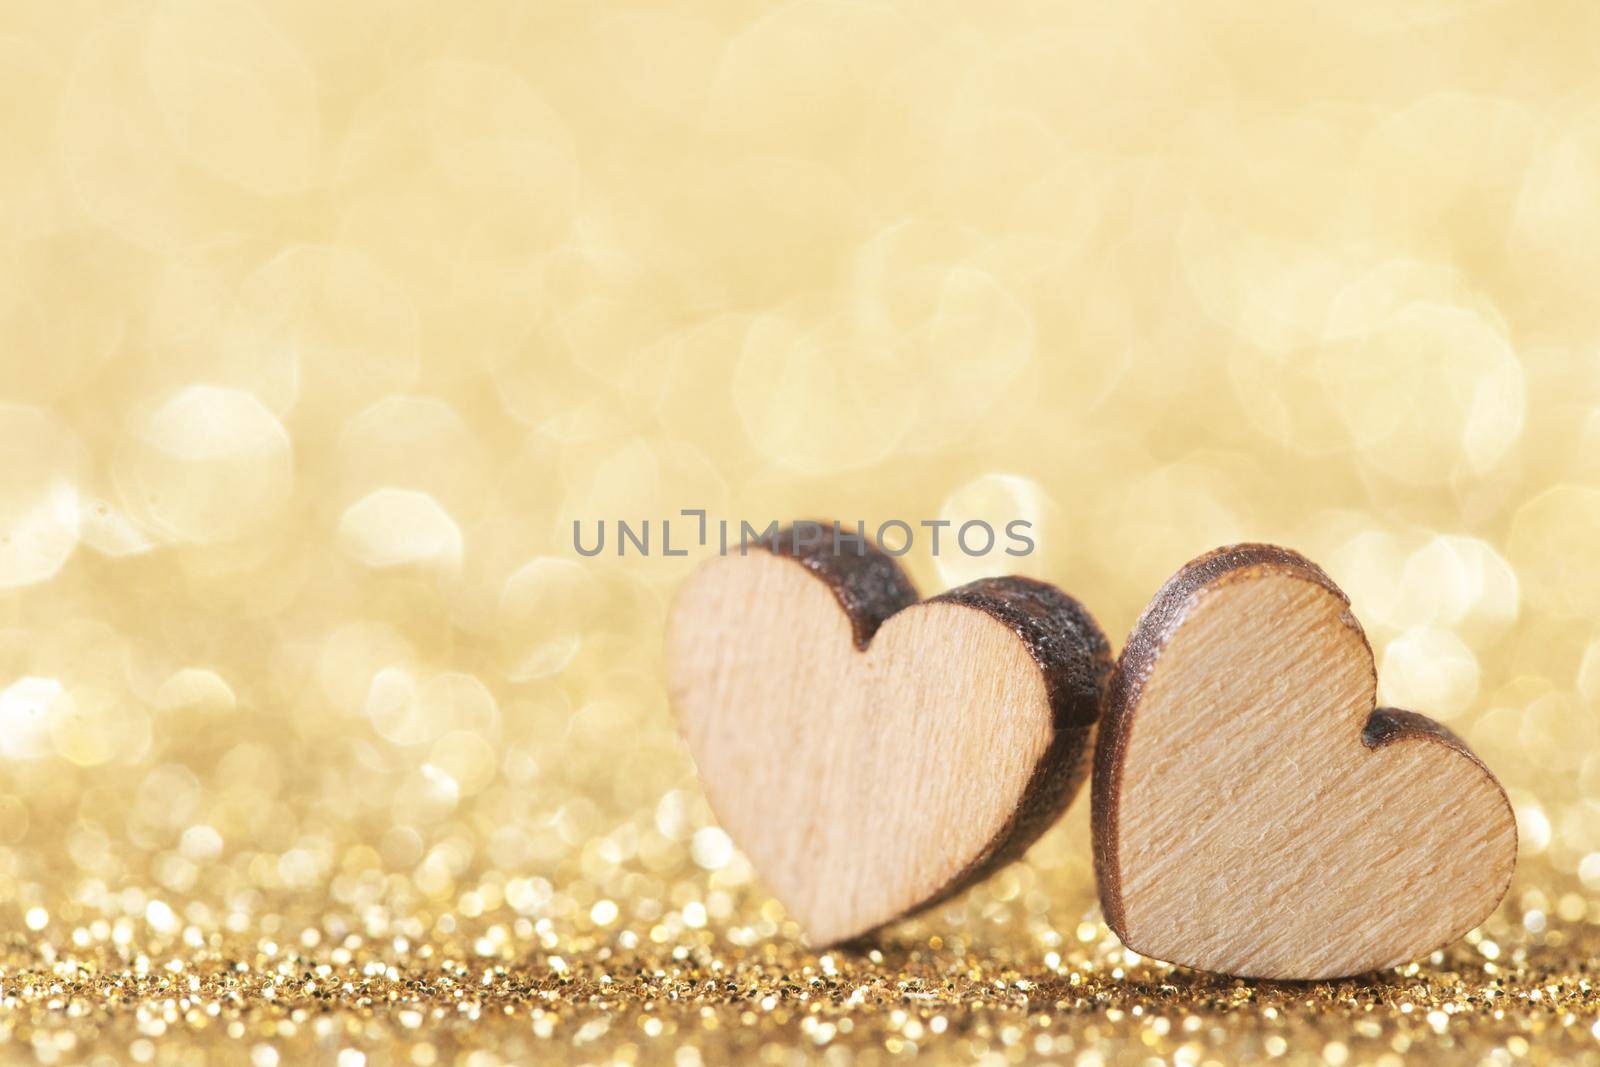 Two small handmade wooden hearts on bright golden lights bokeh background Valentines day card with copy space